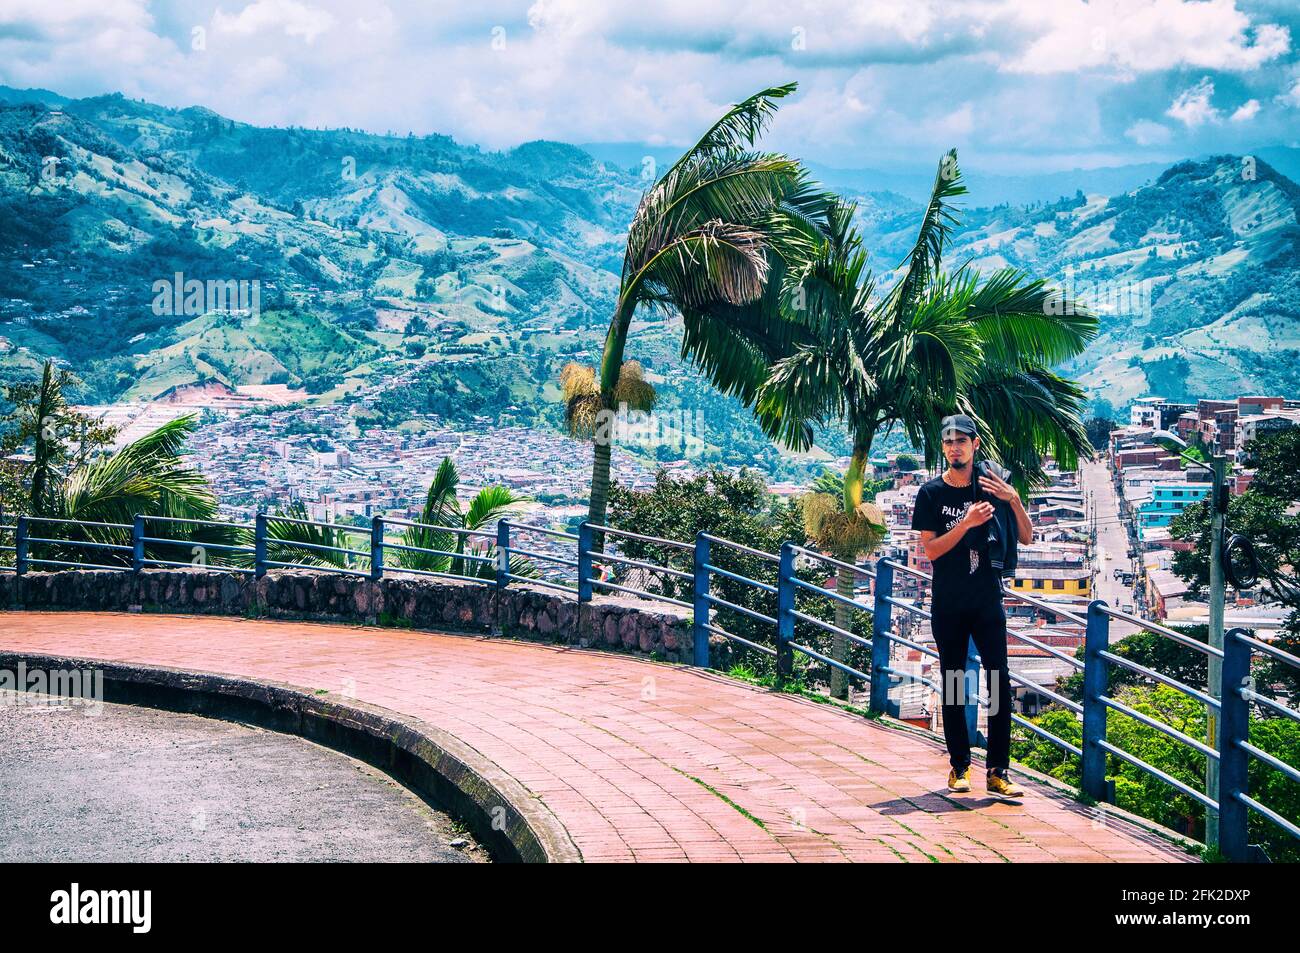 Man walking and mountains in the background. Manizales, Caldas, Colombia. Stock Photo